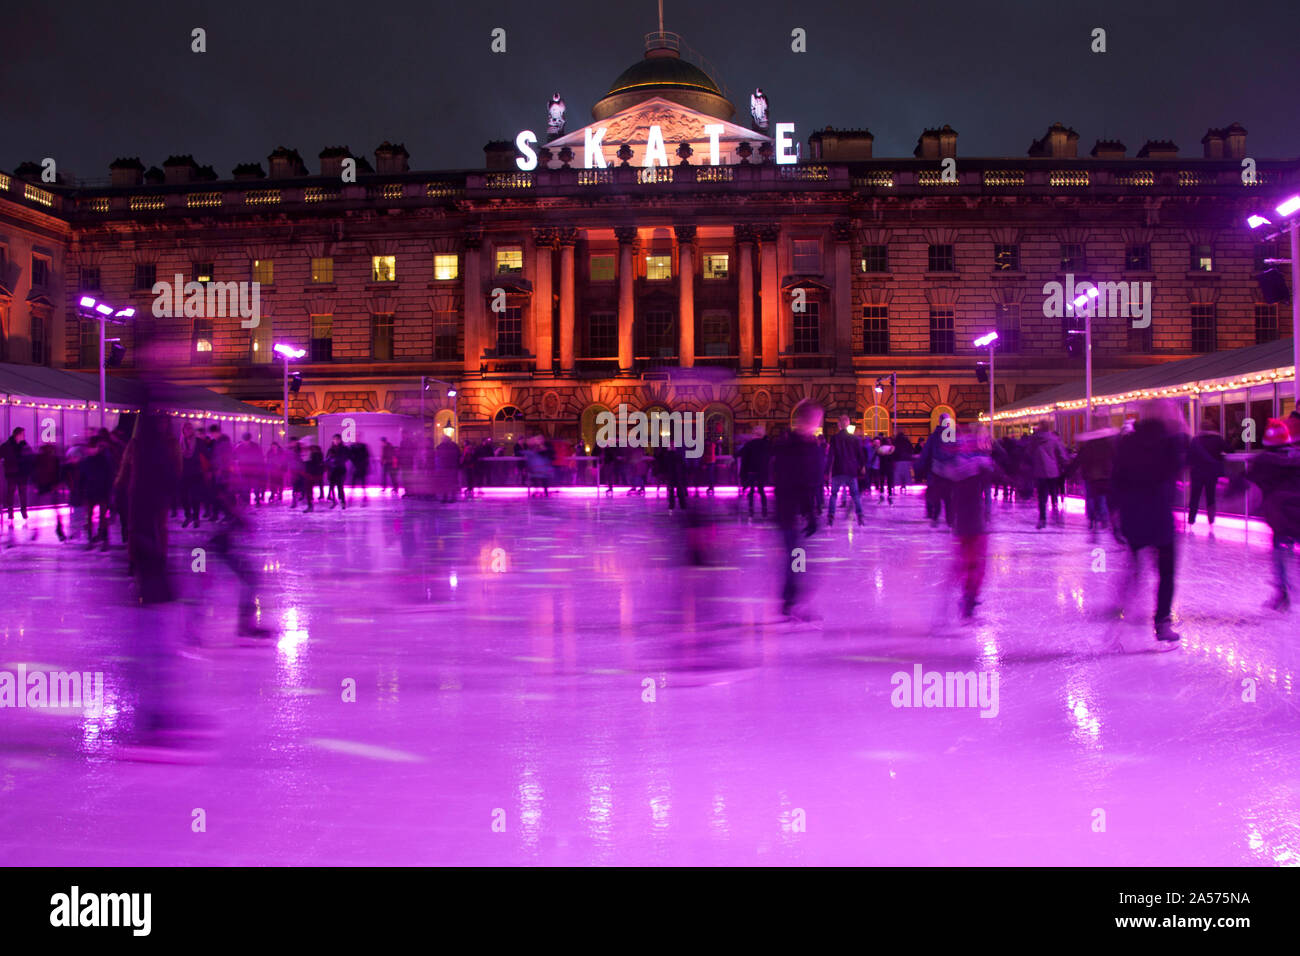 Ice skating on the winter ice rink in Christmas week, Somerset House, London, England, United Kingdom, Europe Stock Photo